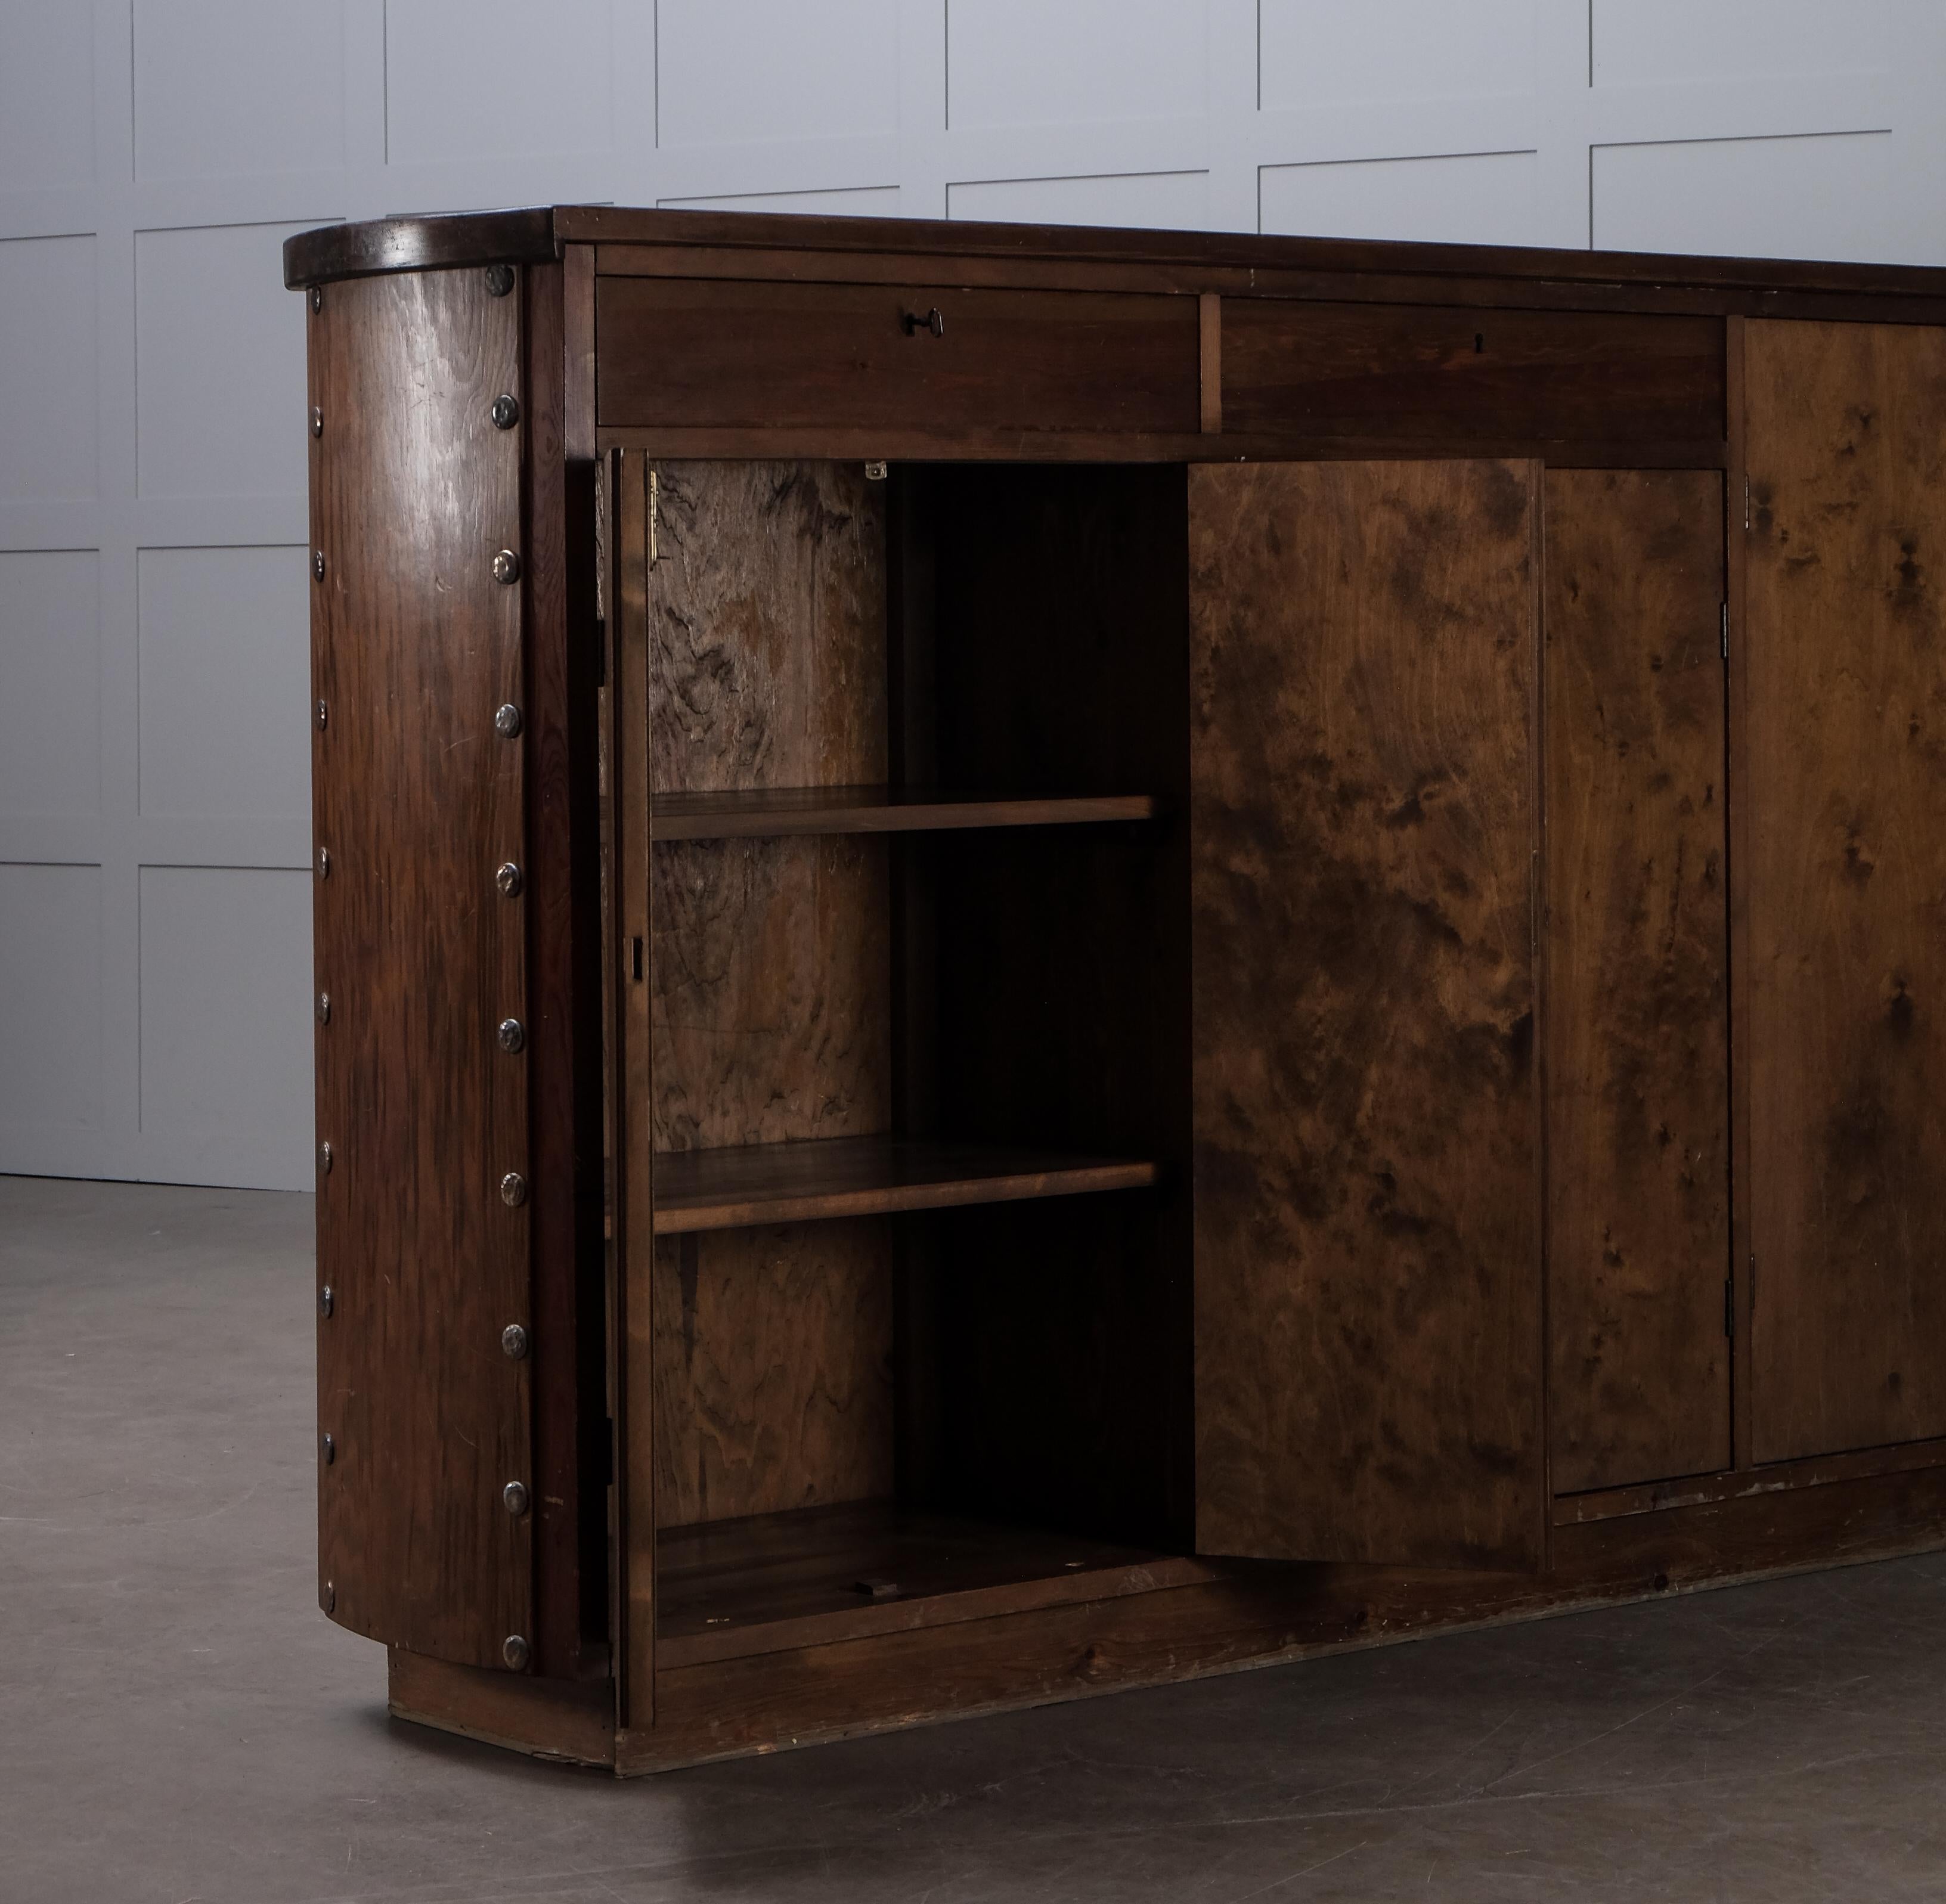 Site-built bar counter from 1933, Sweden. Comes from a very fine 1930s functionalist villa in southwest Sweden. The bar counter is of the same manner as Axel-Einar Hjorth's sports cabin furniture in pine with hand-forged wrought iron details.